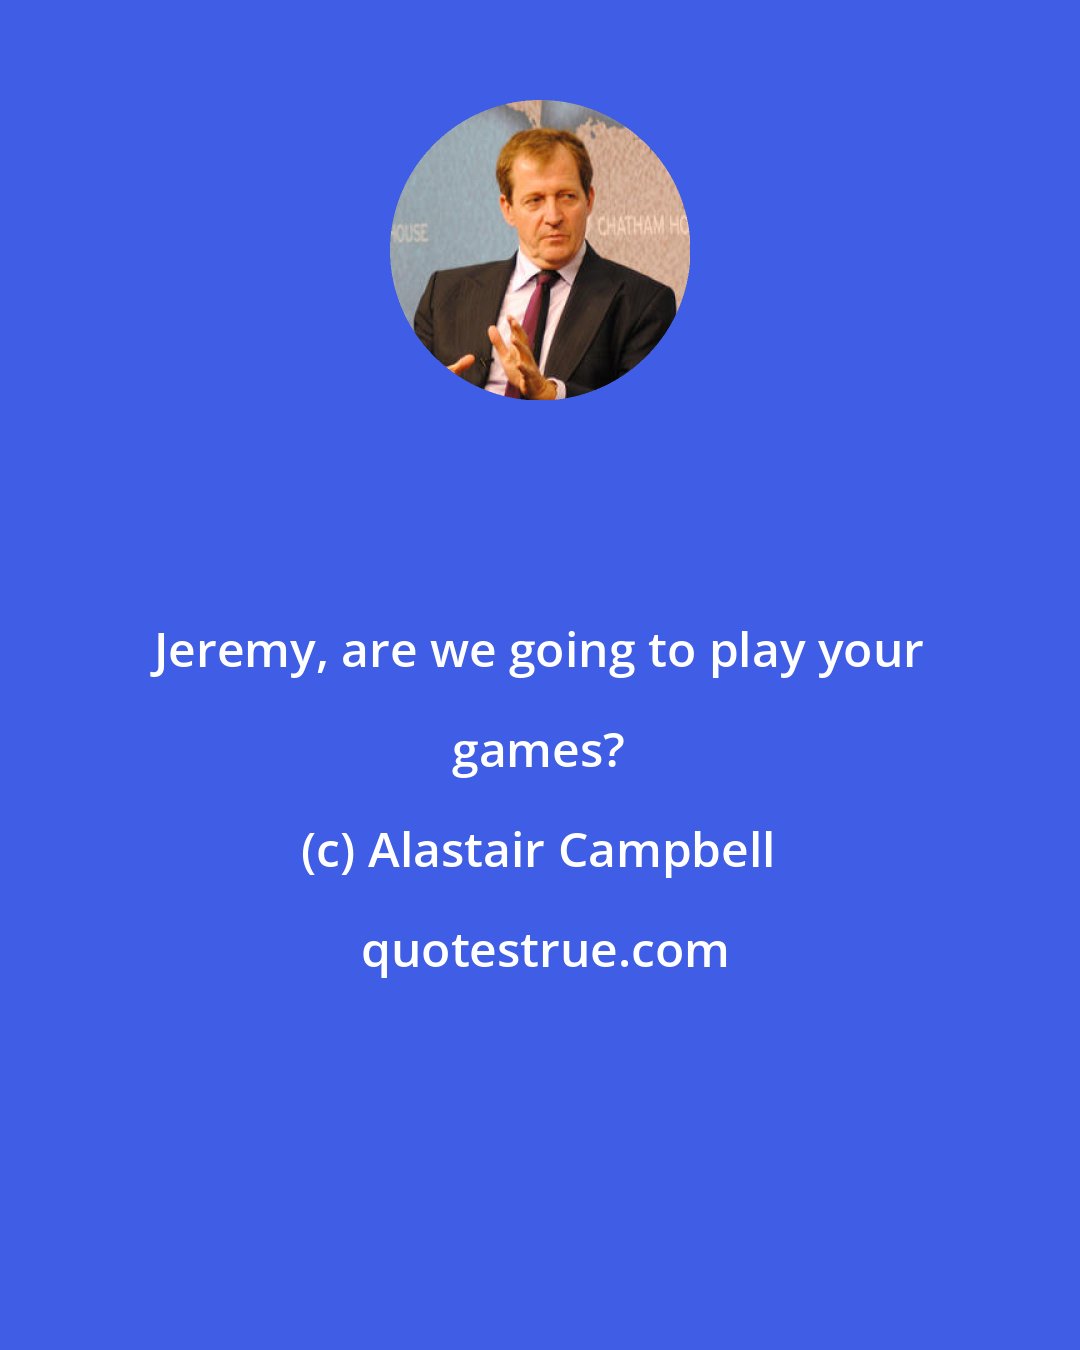 Alastair Campbell: Jeremy, are we going to play your games?